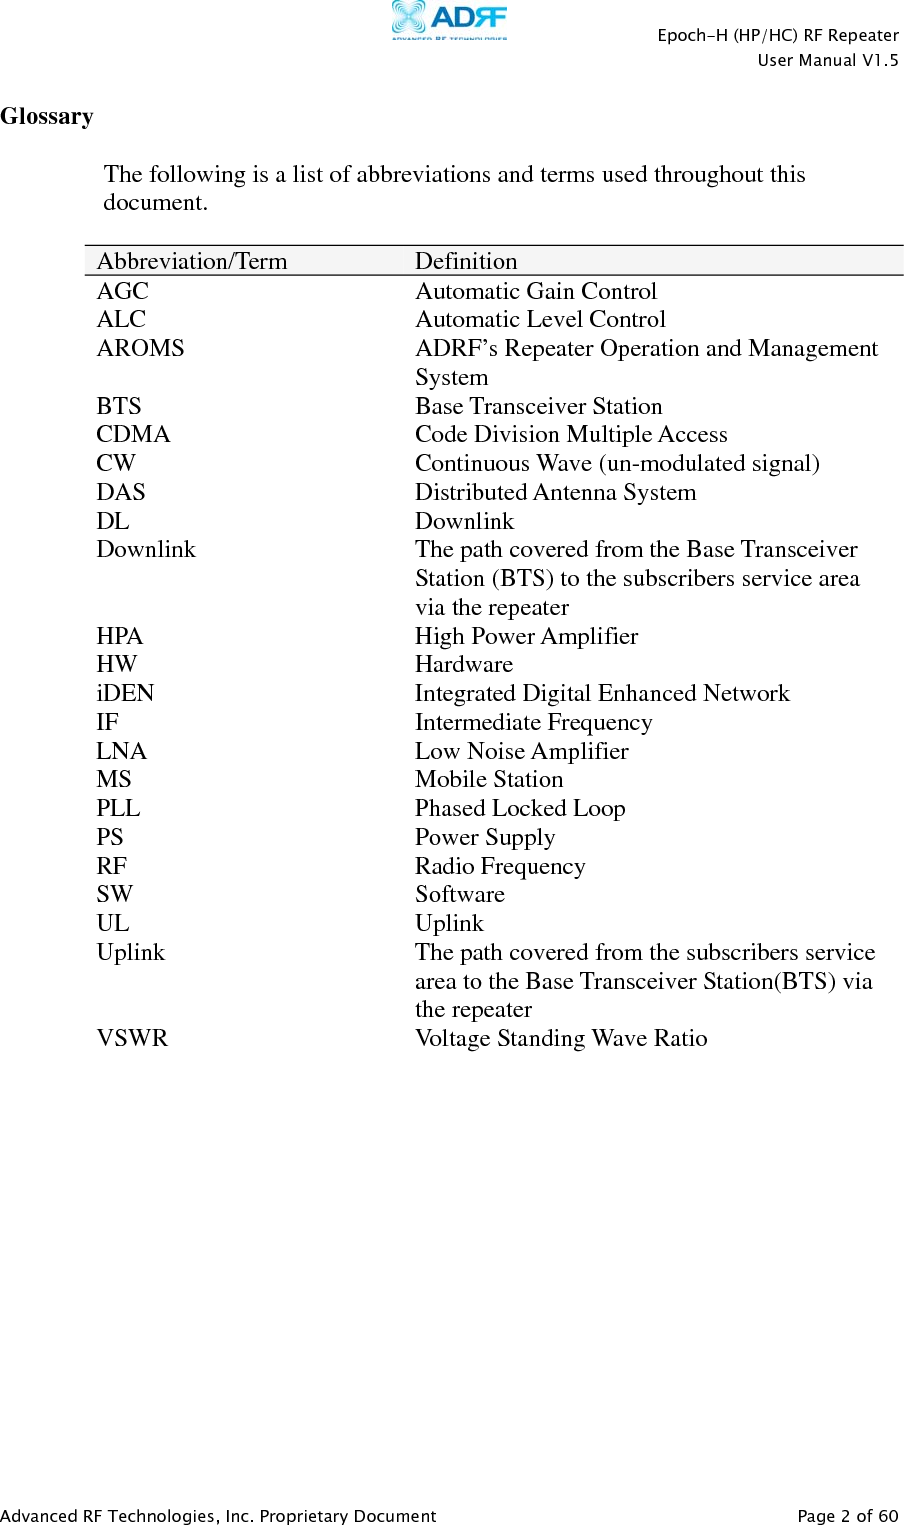    Epoch-H (HP/HC) RF Repeater  User Manual V1.5  Advanced RF Technologies, Inc. Proprietary Document   Page 2 of 60   Glossary The following is a list of abbreviations and terms used throughout this document.  Abbreviation/Term  Definition AGC Automatic Gain Control ALC  Automatic Level Control AROMS  ADRF’s Repeater Operation and Management System BTS Base Transceiver Station CDMA  Code Division Multiple Access CW Continuous Wave (un-modulated signal) DAS Distributed Antenna System DL Downlink Downlink  The path covered from the Base Transceiver Station (BTS) to the subscribers service area via the repeater HPA High Power Amplifier HW Hardware iDEN  Integrated Digital Enhanced Network IF Intermediate Frequency LNA Low Noise Amplifier MS  Mobile Station  PLL  Phased Locked Loop PS Power Supply RF Radio Frequency SW Software UL Uplink Uplink  The path covered from the subscribers service area to the Base Transceiver Station(BTS) via the repeater  VSWR  Voltage Standing Wave Ratio  